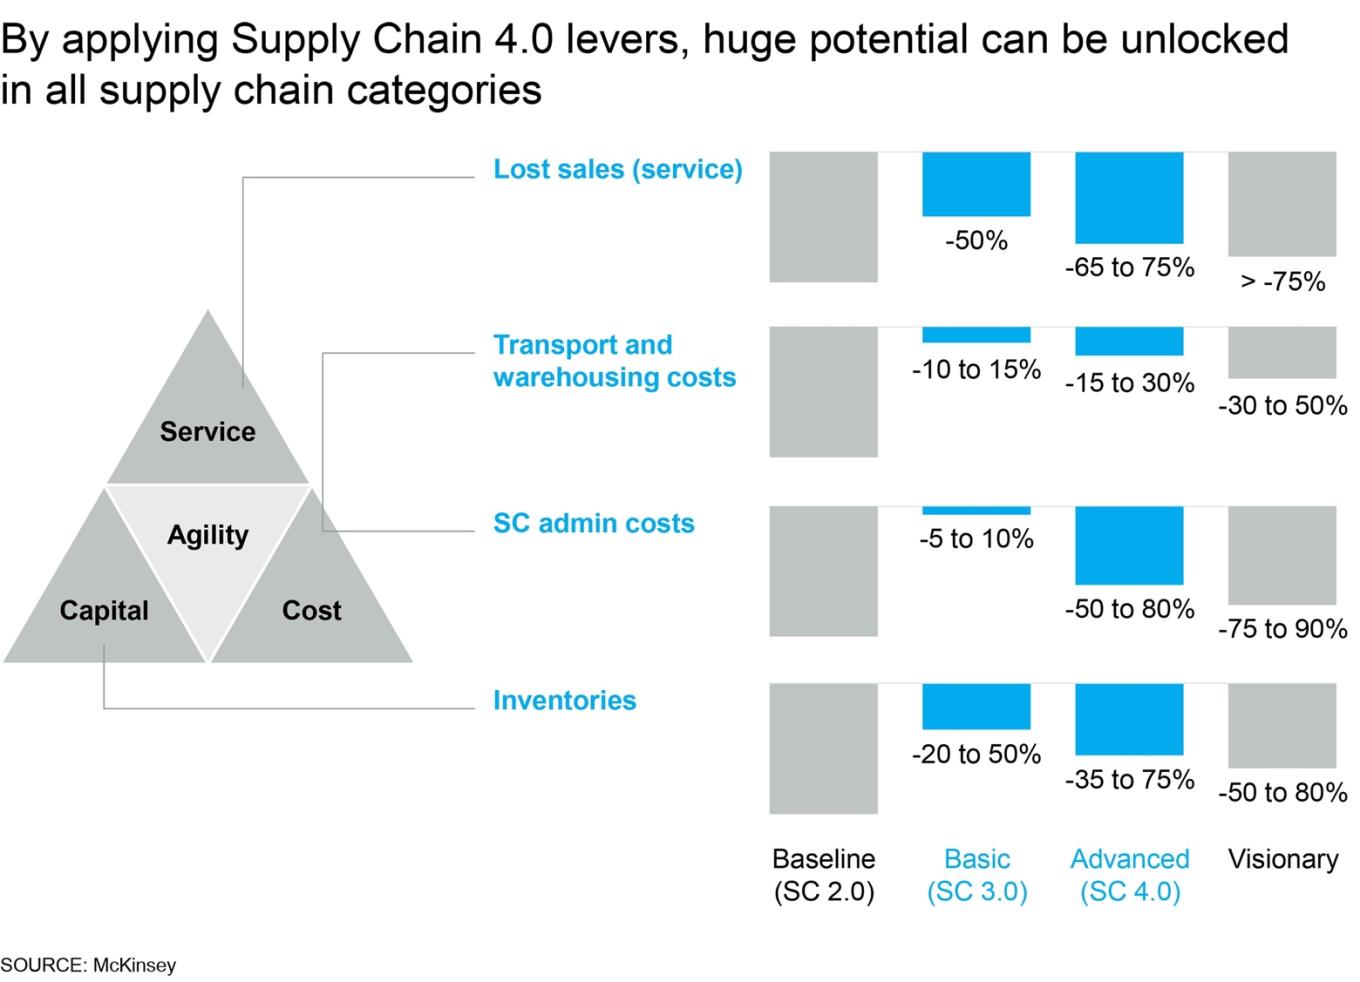 huge impact of supply chain 4.0 in all categories 